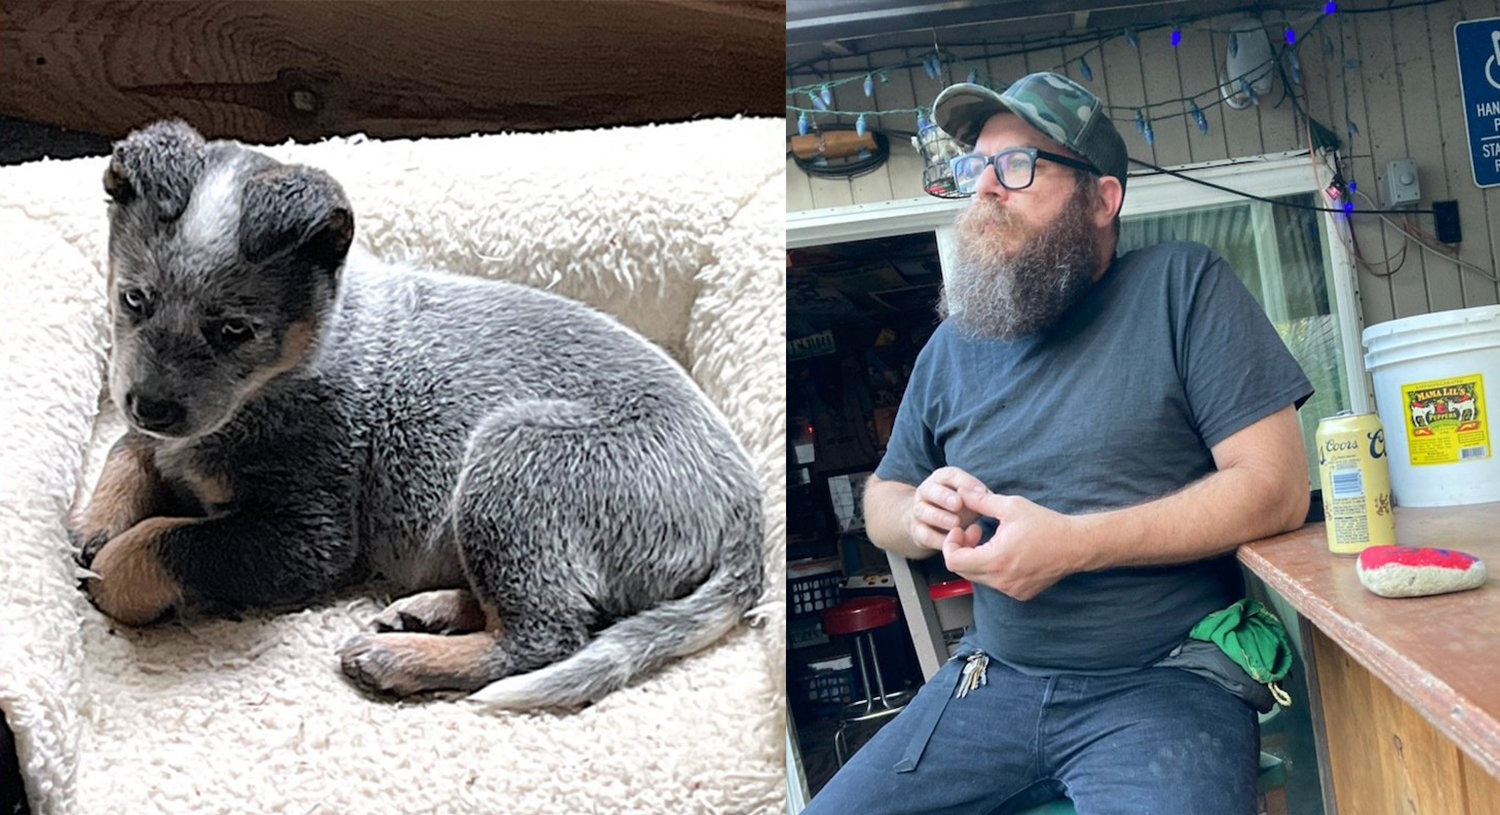 Aron Christensen is pictured along with his dog, Buzzo, in these images previously provided to The Chronicle.